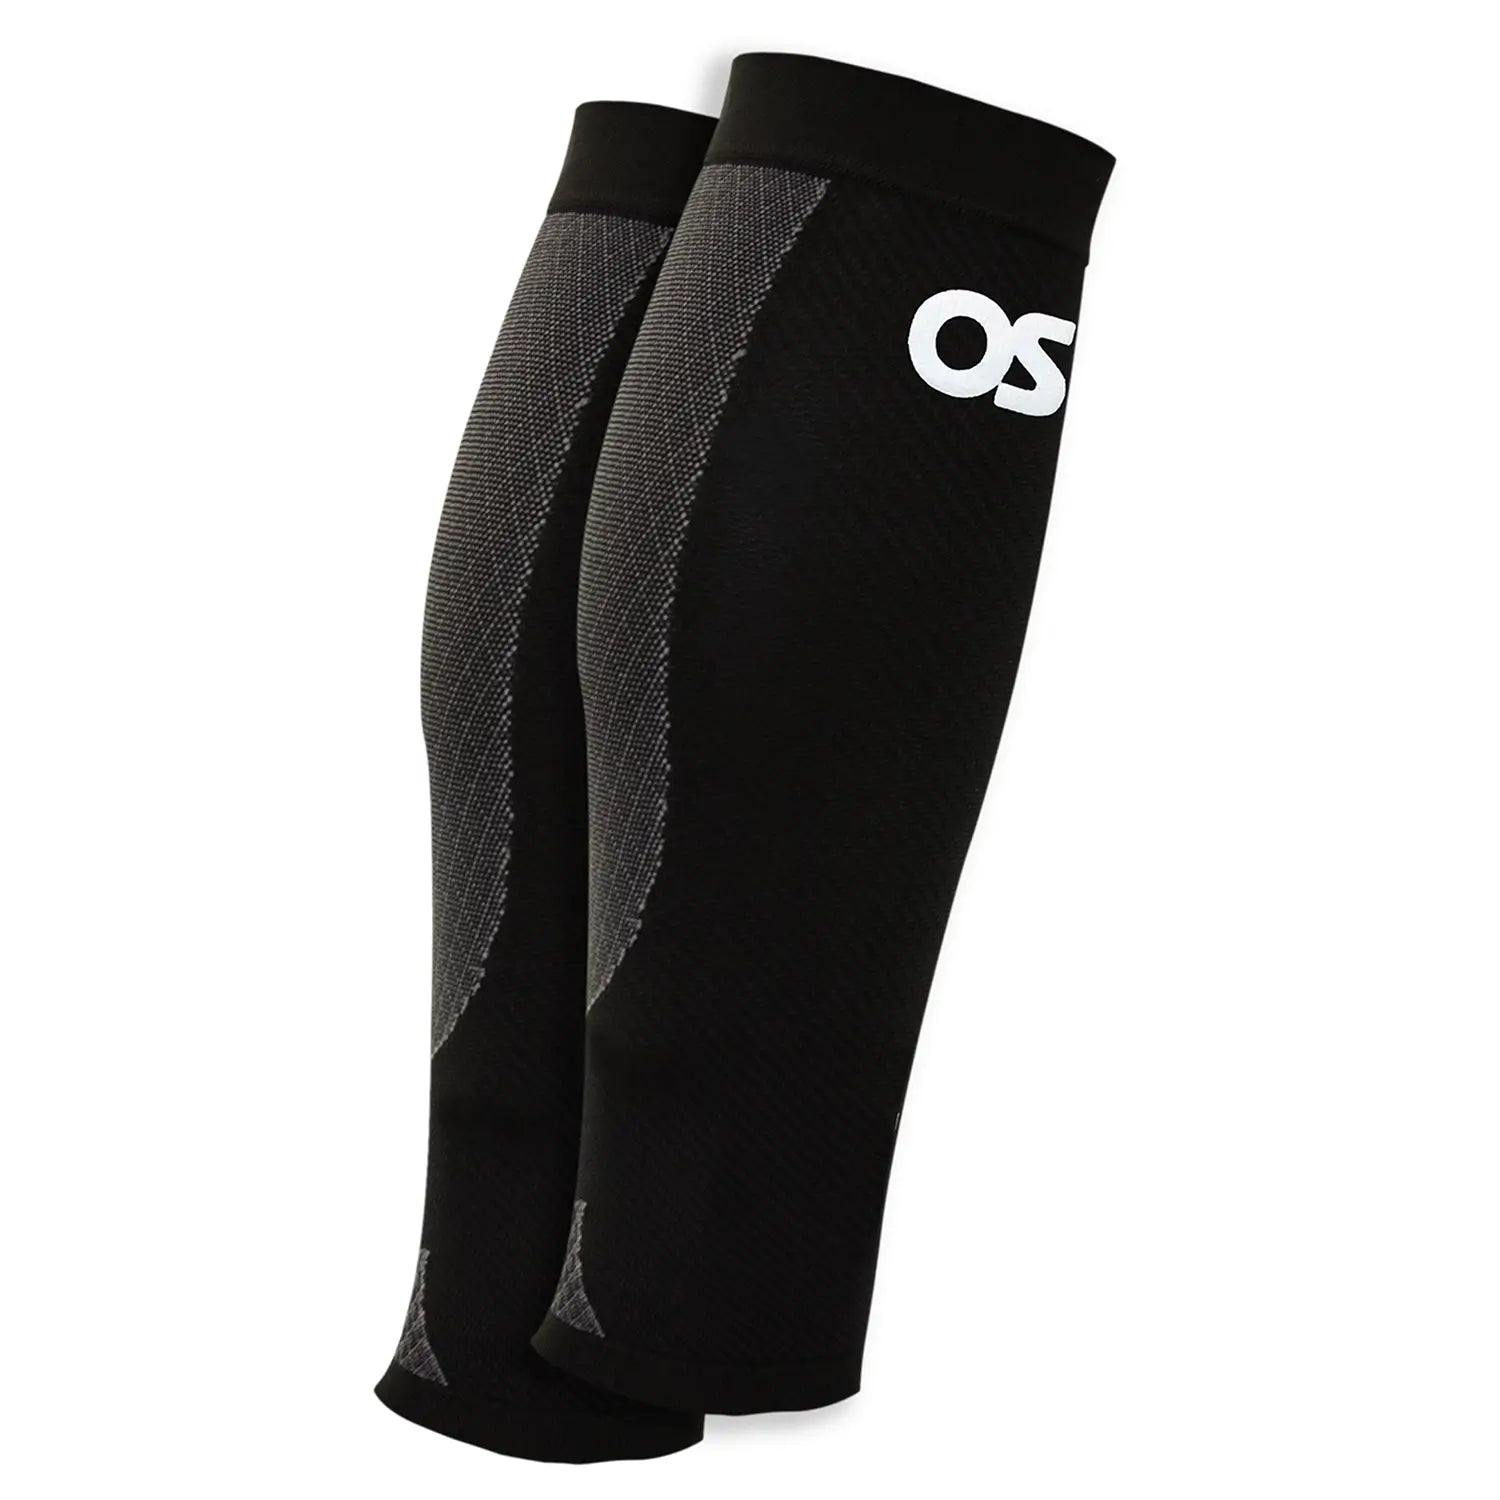 CS6 Calf Compression Sleeves For Lower Leg Pain & Swelling – My